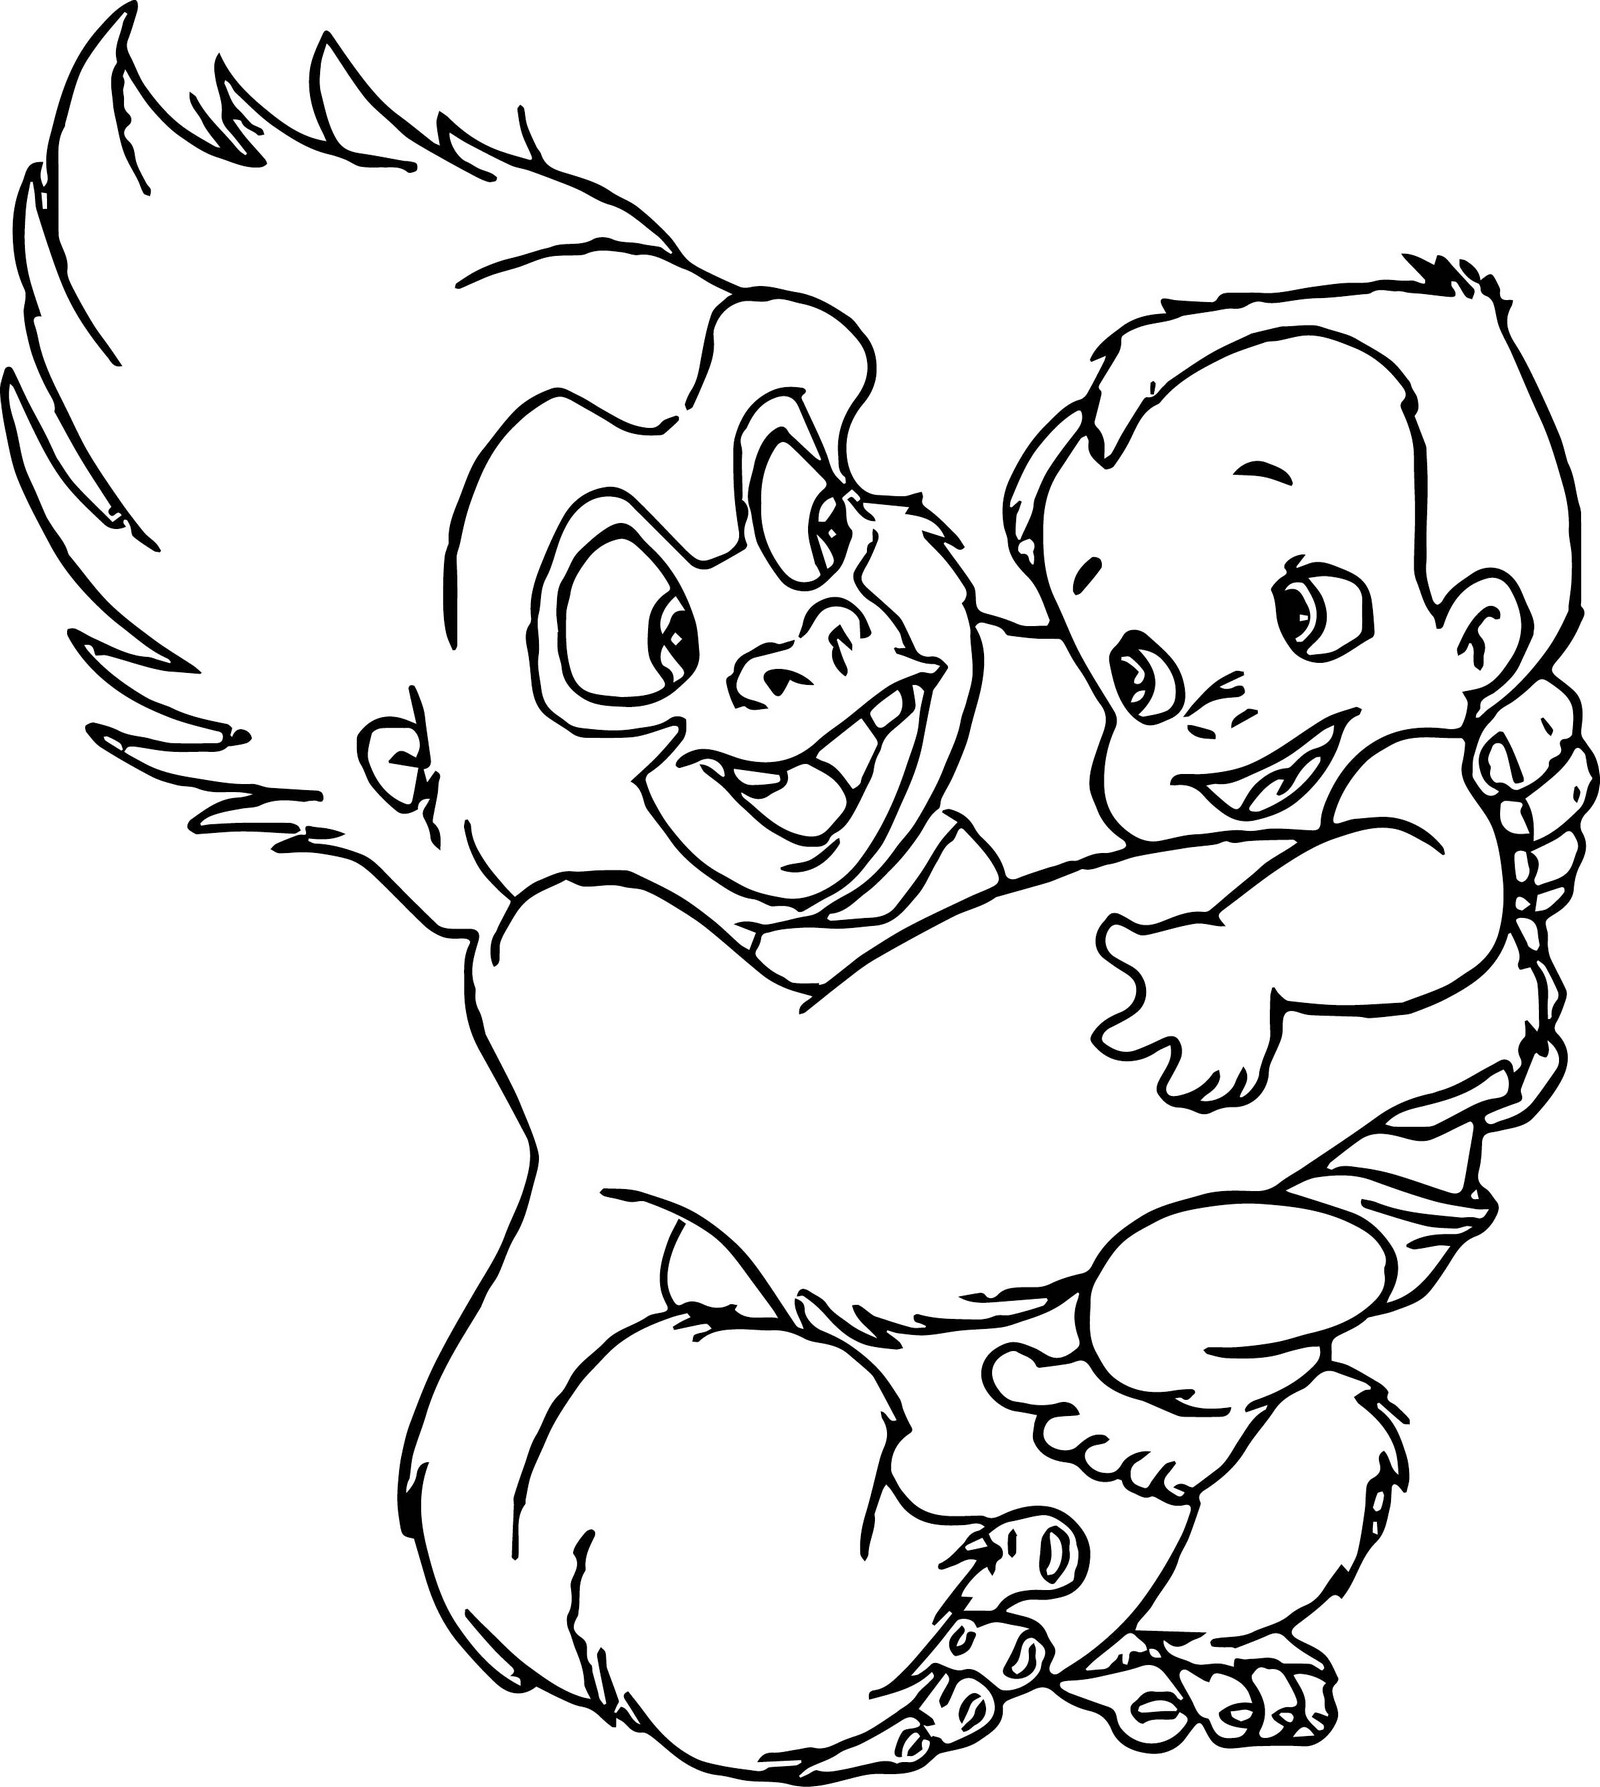 Terk holding Baby tarzan coloring pages